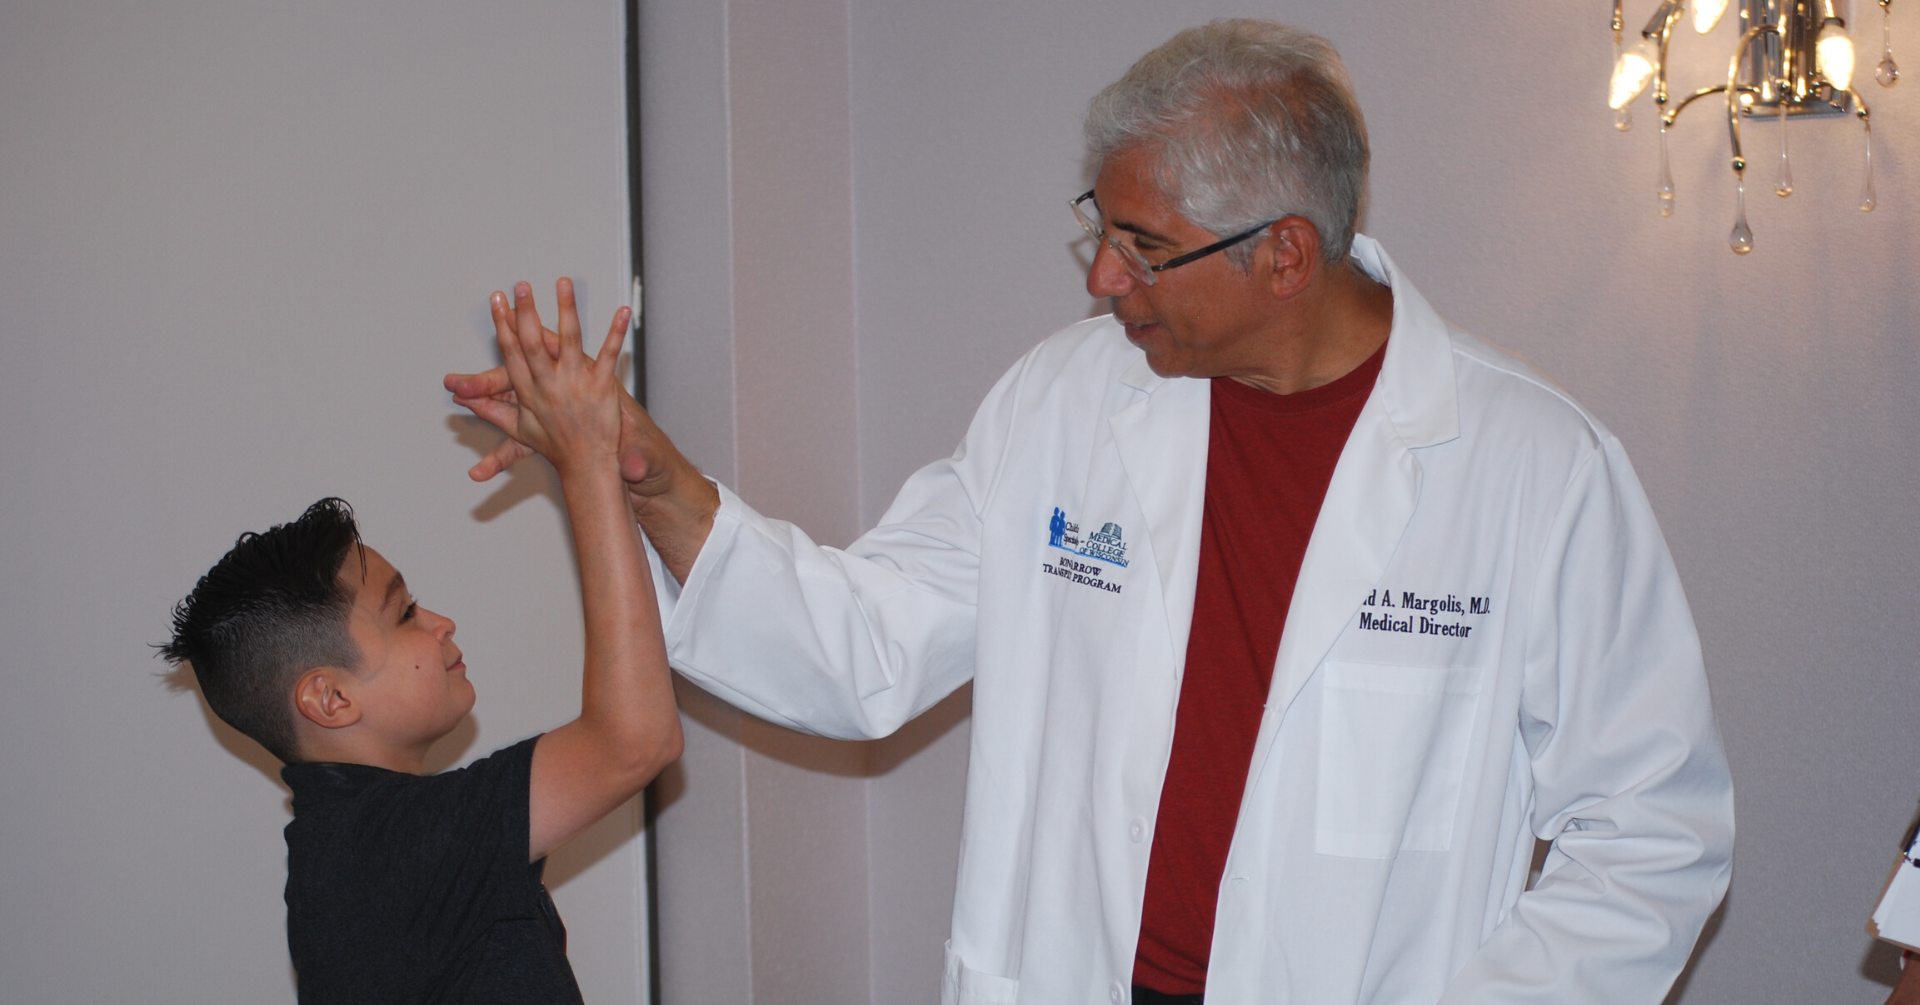 Introductory image: Dr. Margolis with Young Patient - High Five